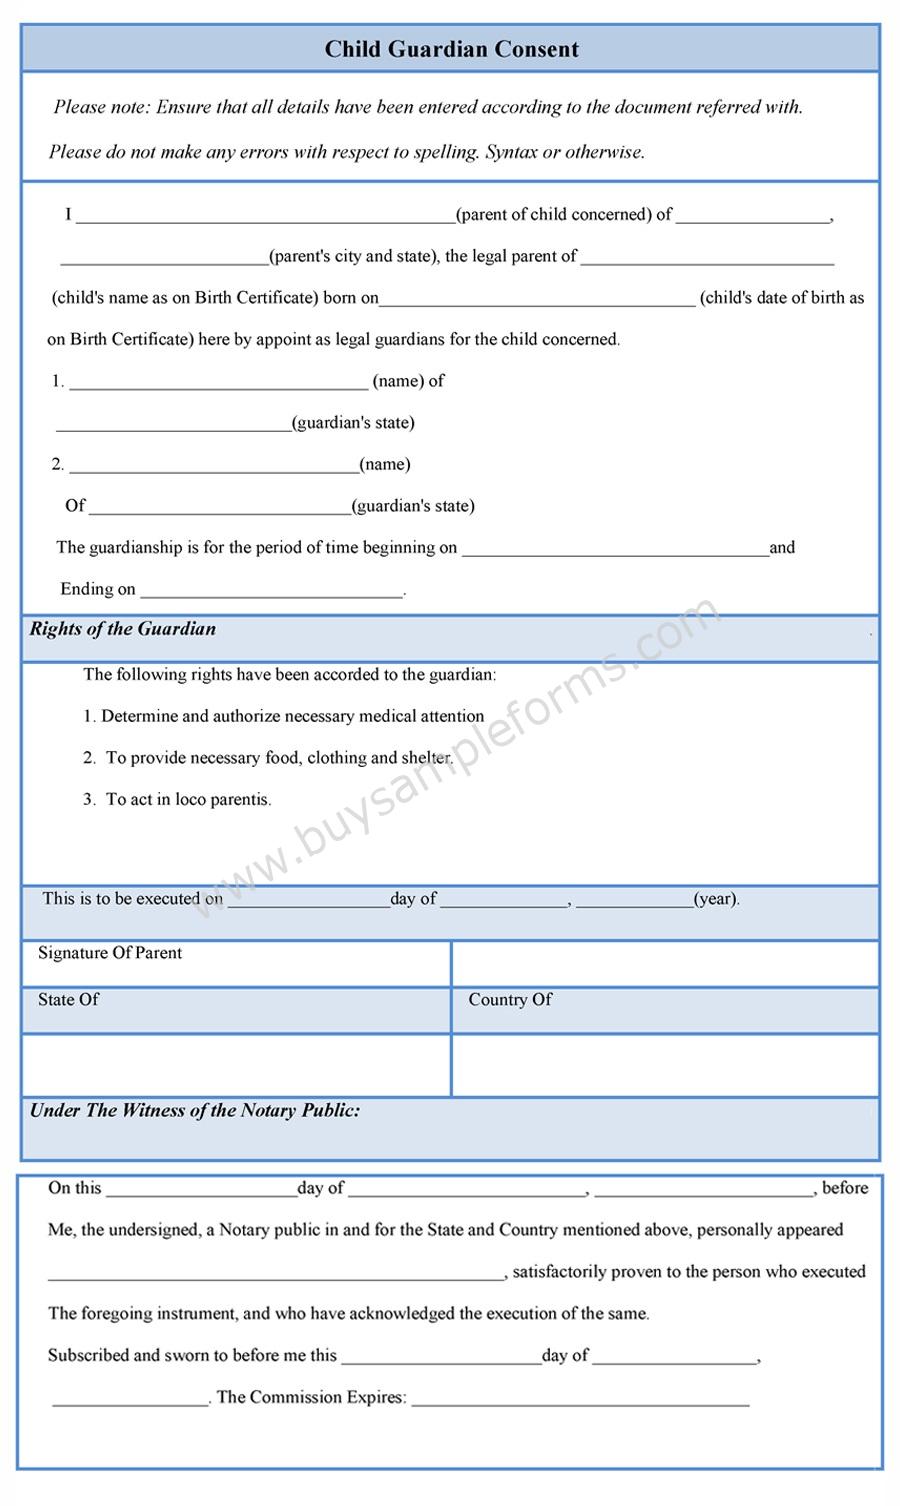 Child Guardian Consent Form